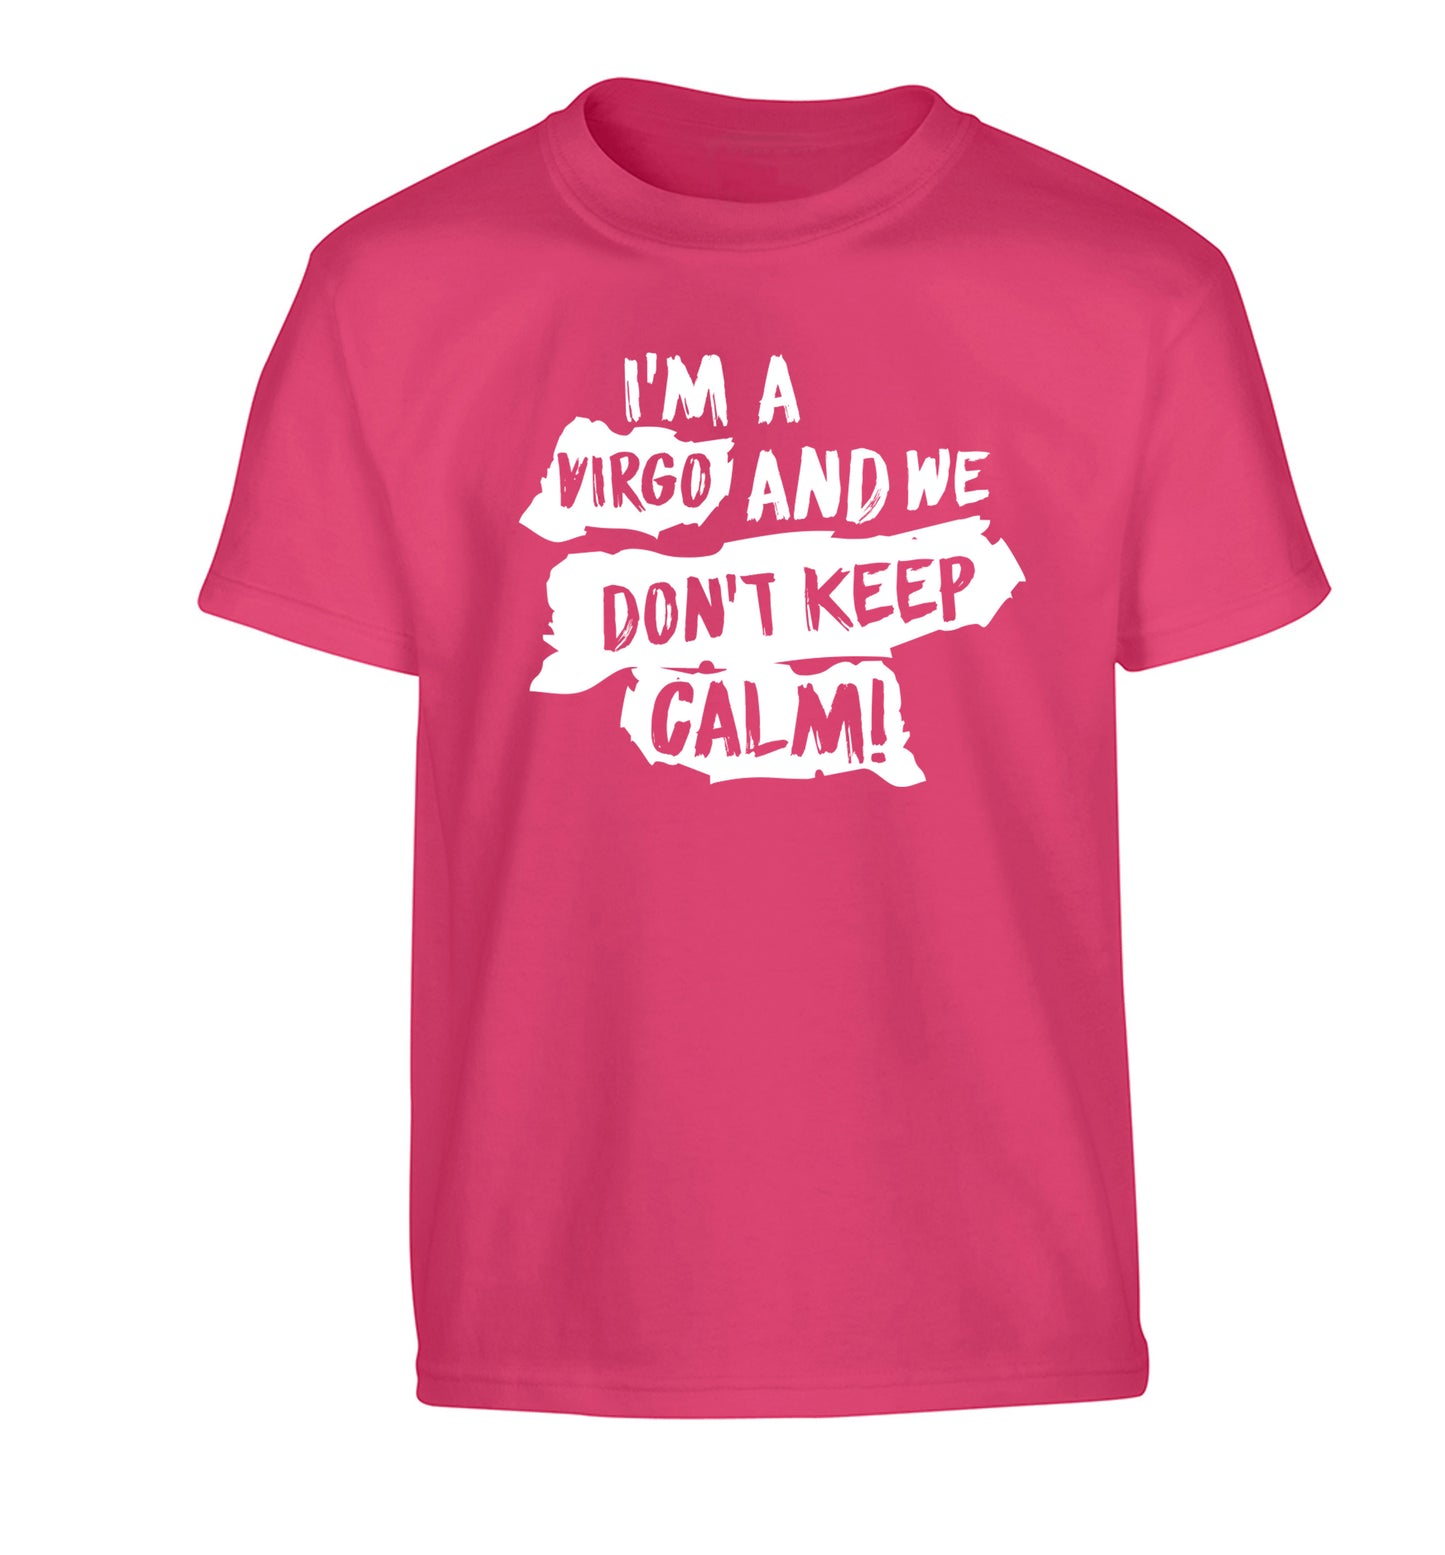 I'm a virgo and we don't keep calm Children's pink Tshirt 12-13 Years